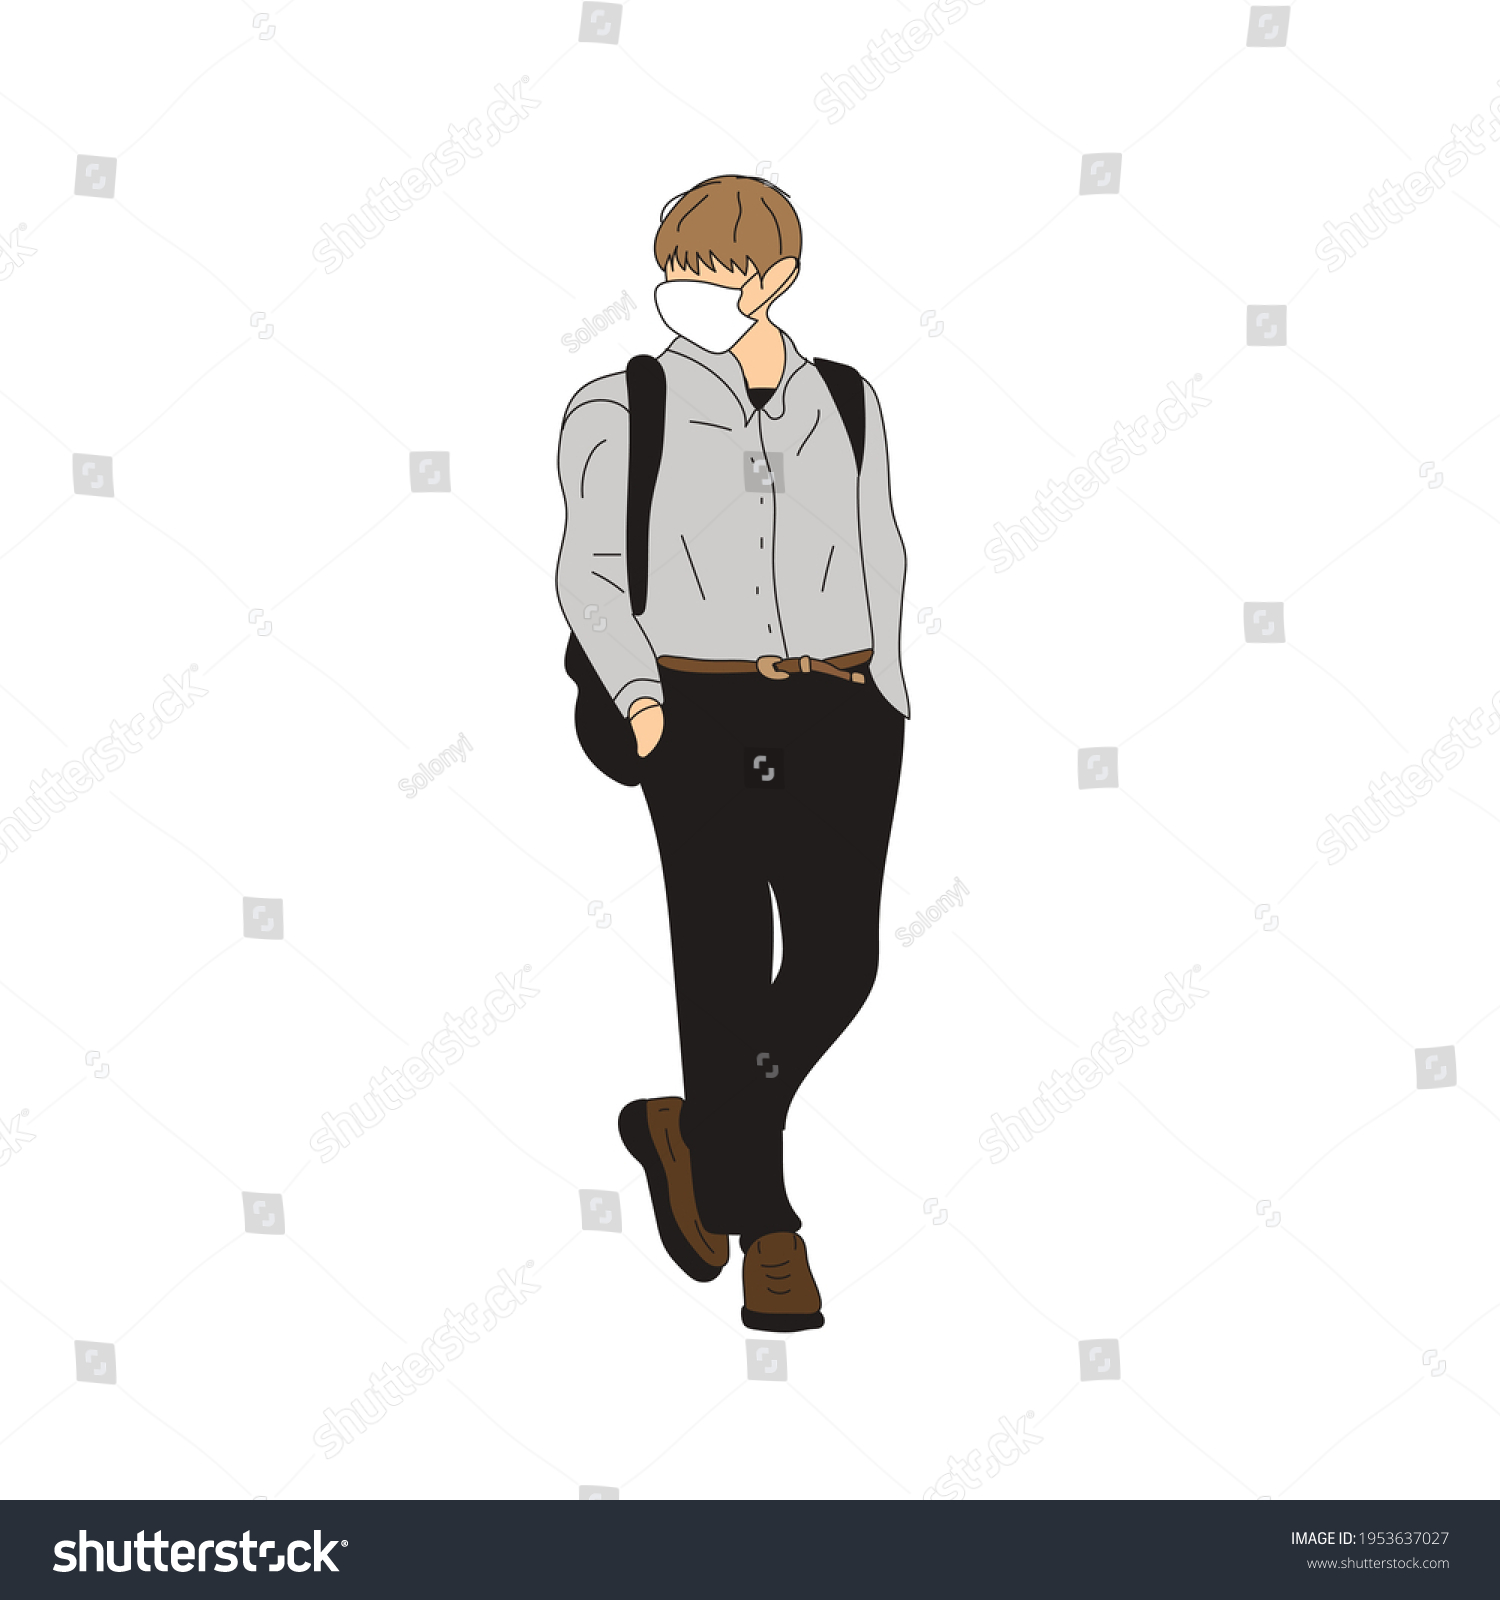 SVG of Vector illustration of Kpop street fashion. Street idols of Koreans. Kpop male idol fashion. A guy in a gray shirt and black pants with a backpack. svg